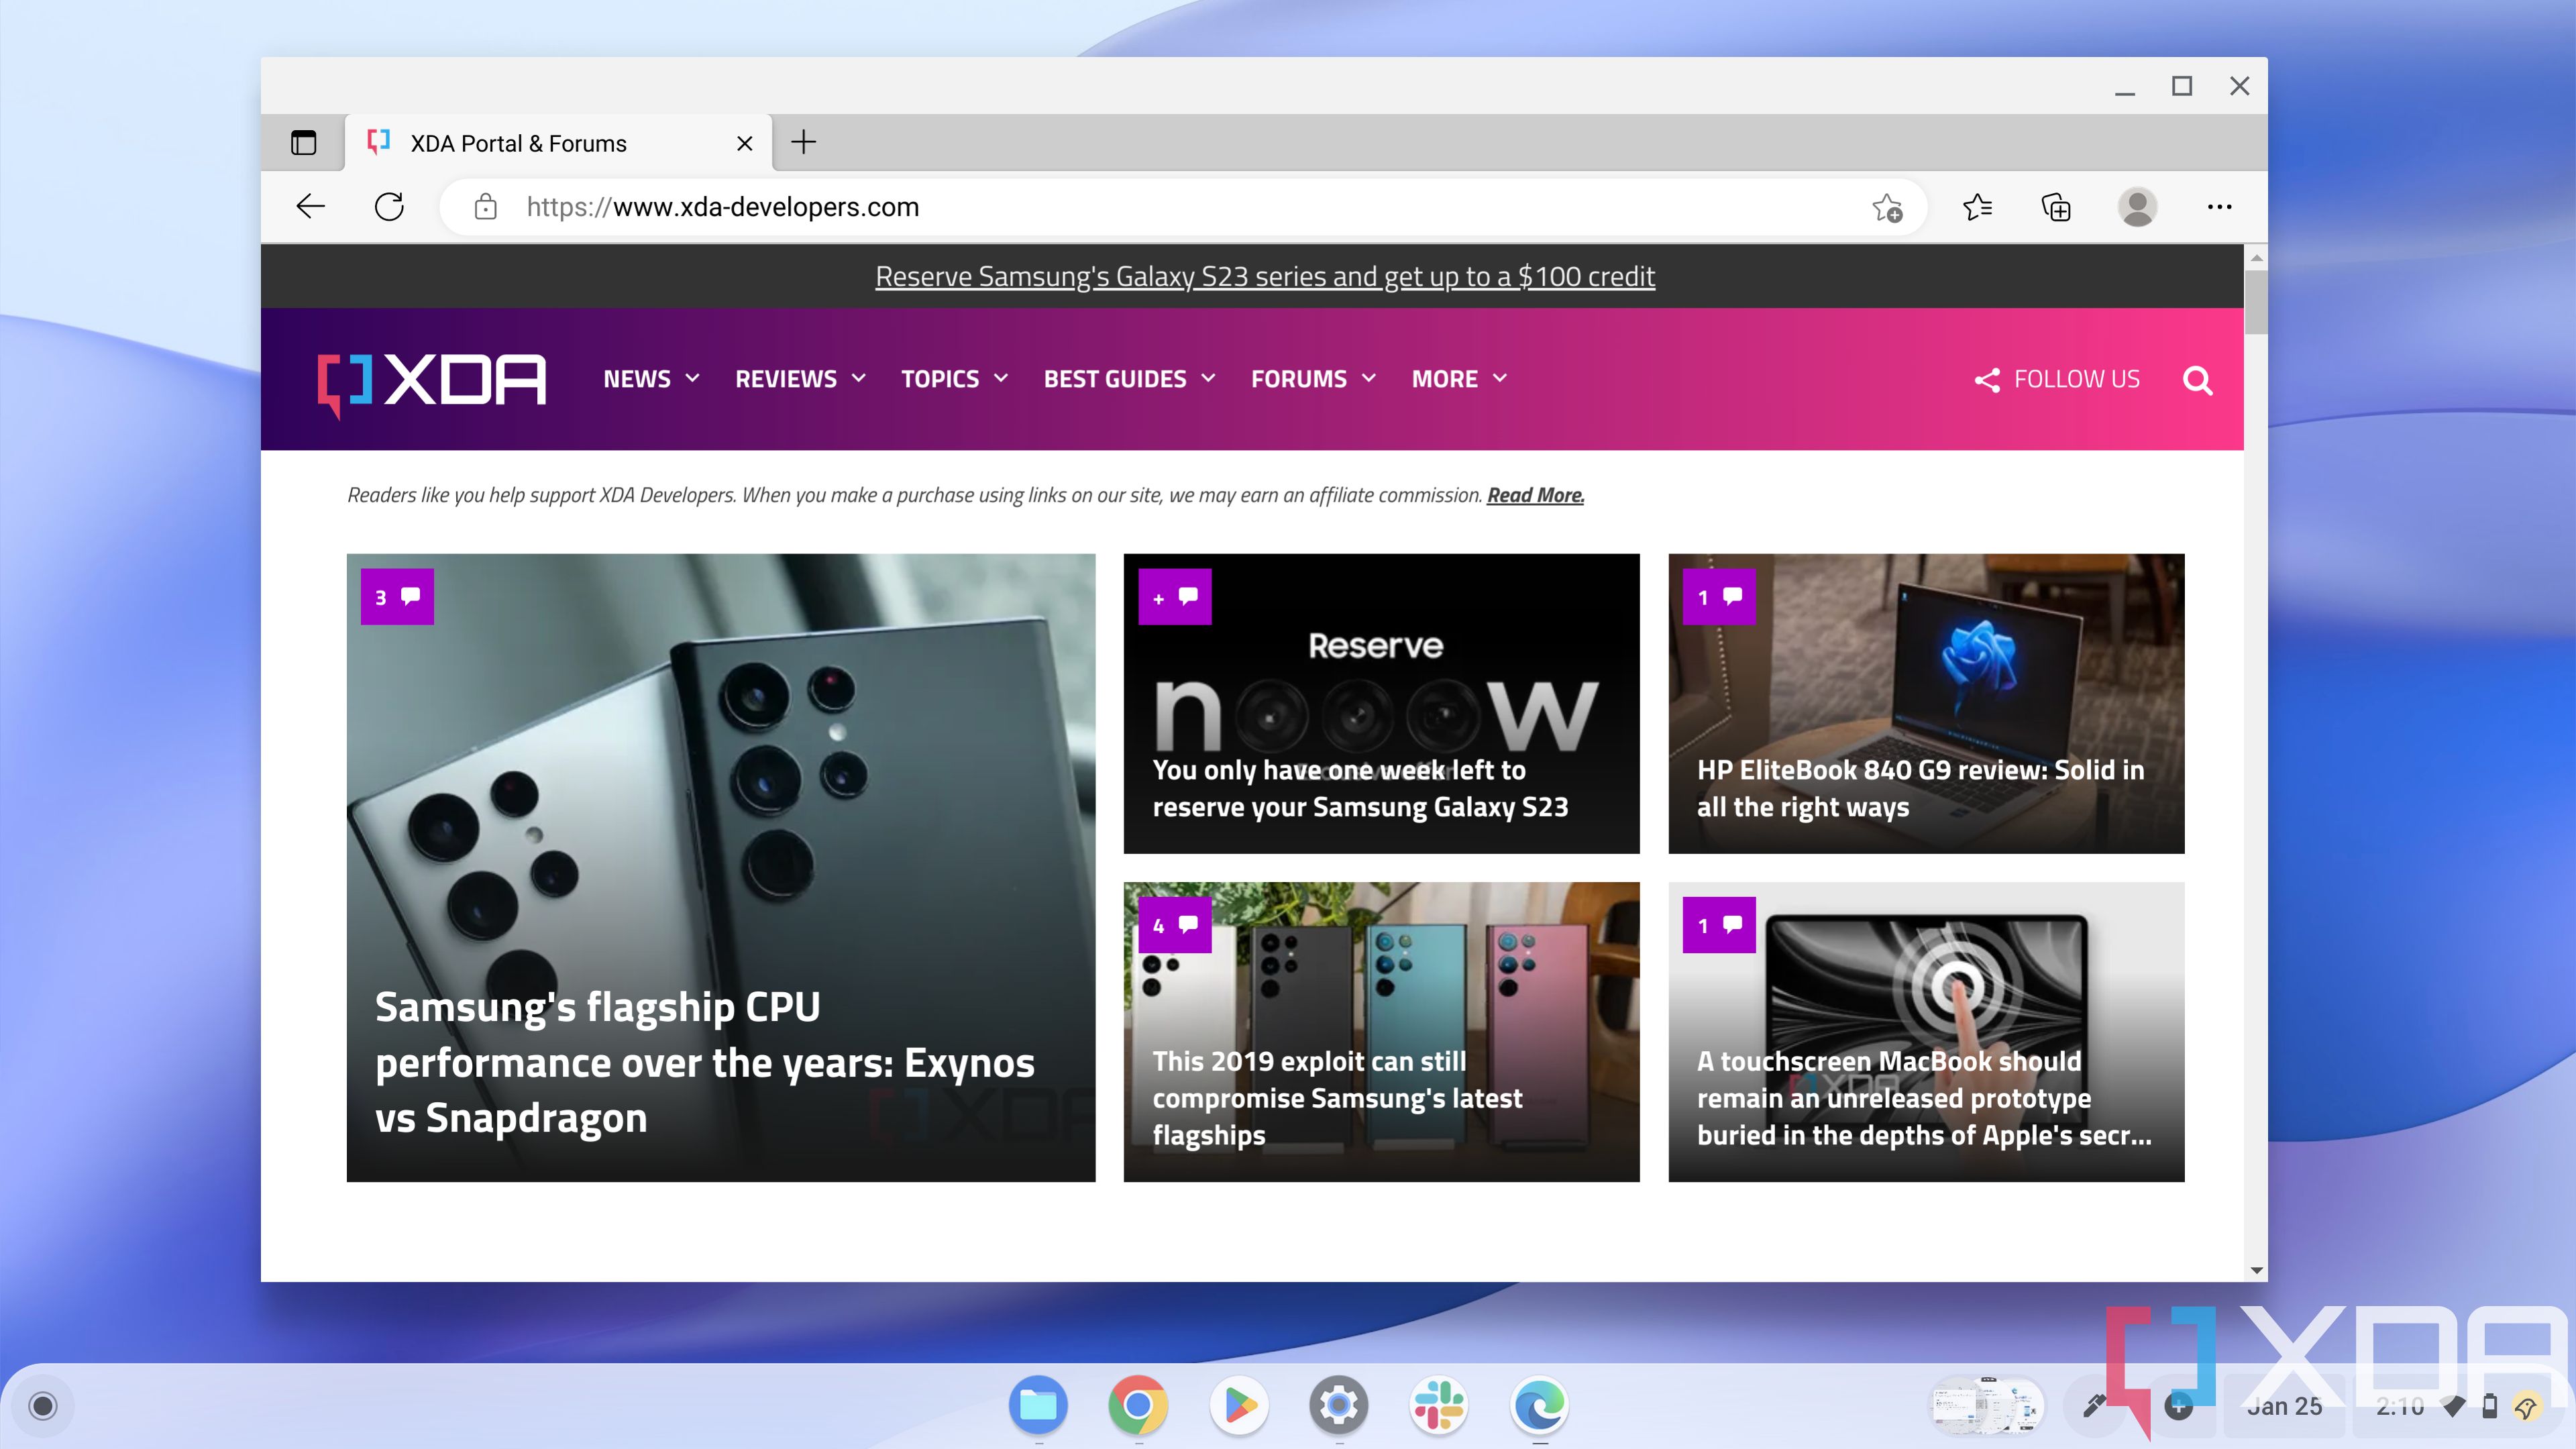 Here's how you can install Microsoft Edge on Chrome OS, even though it is  not supported